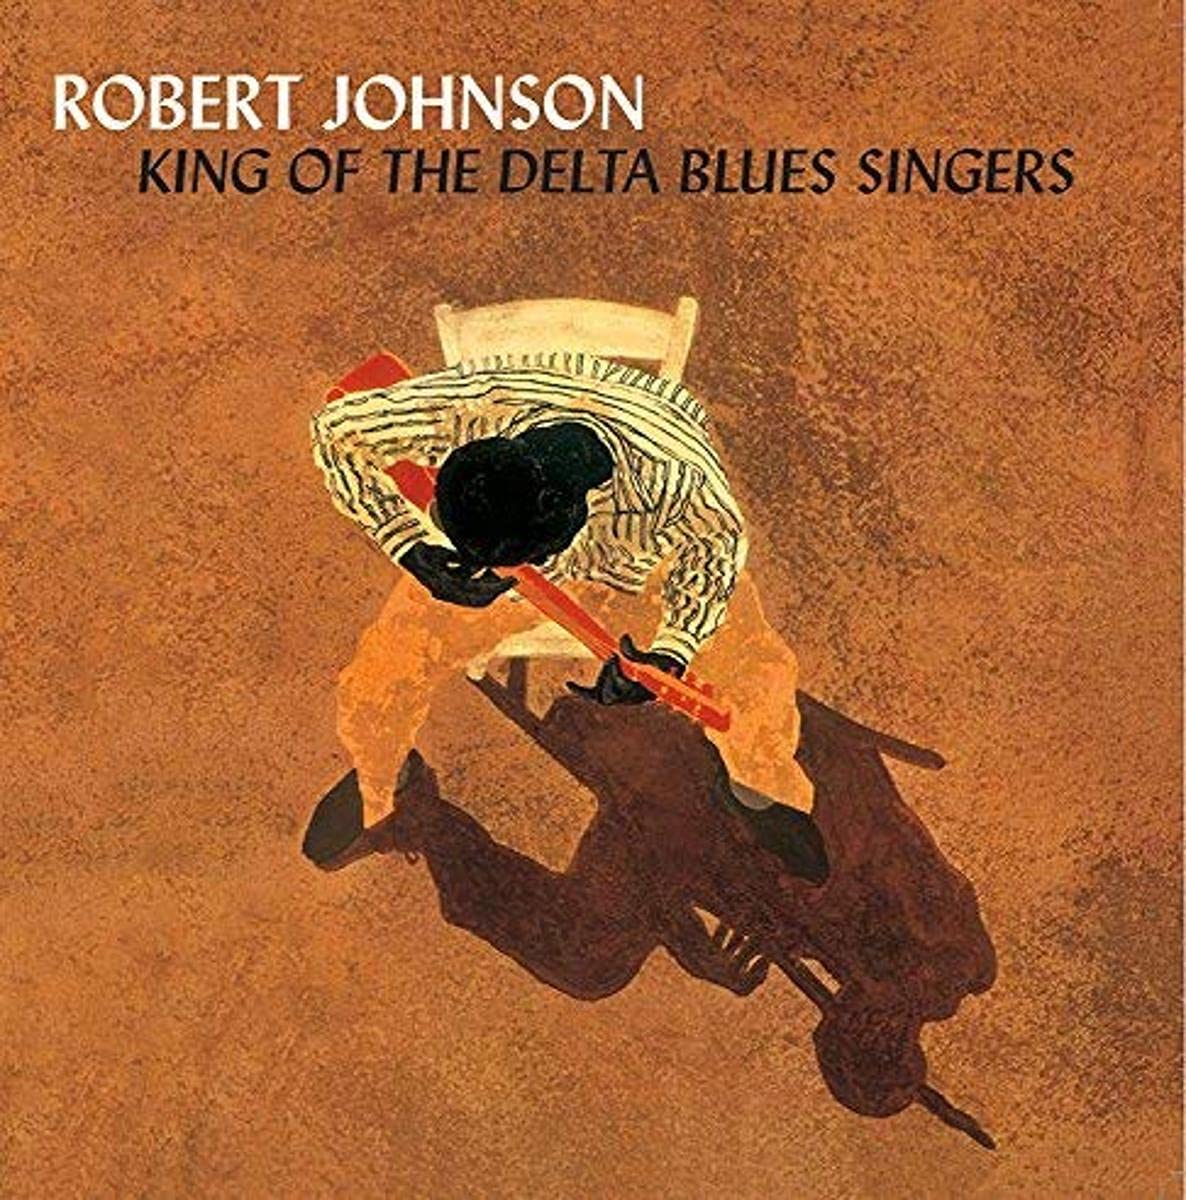 Robert Johnson: The Soul of the Blues Lives On